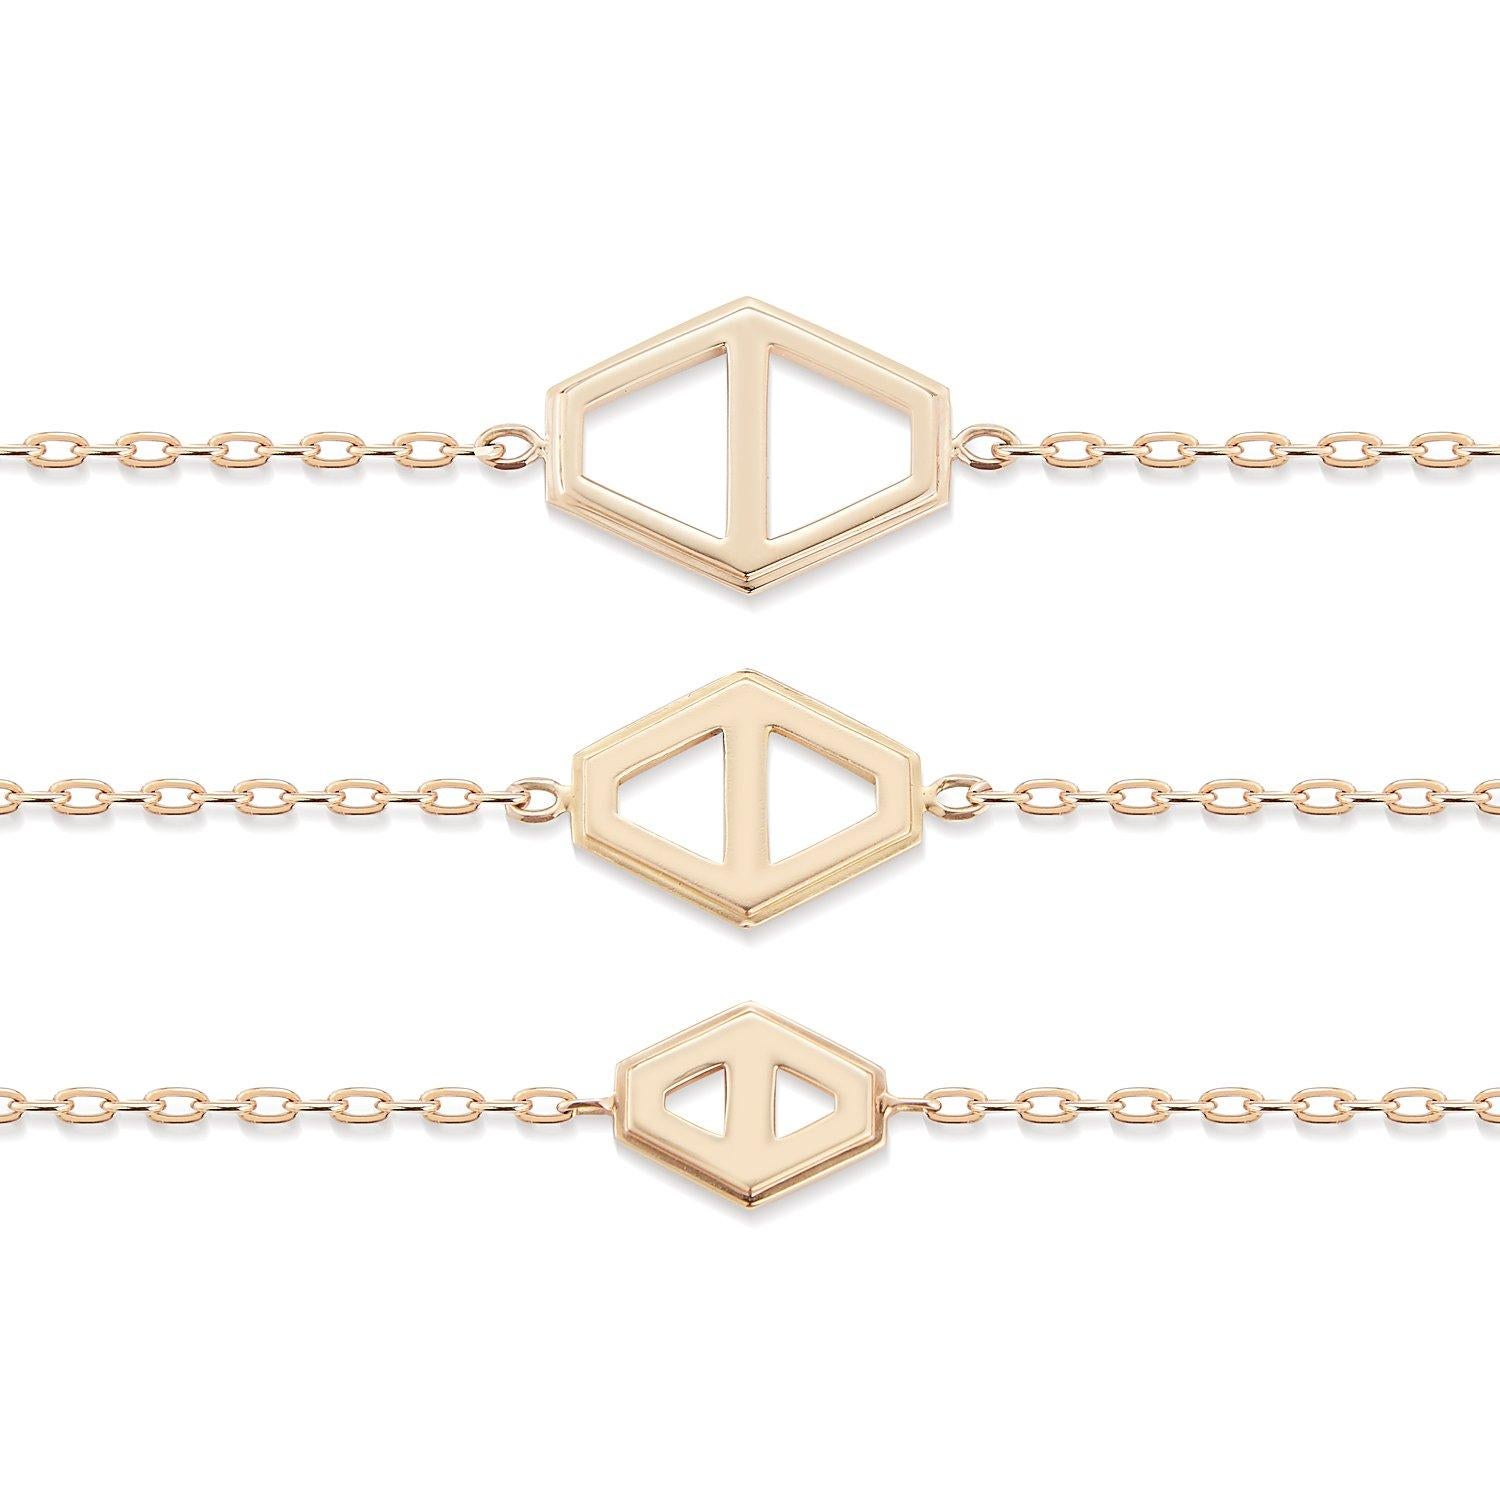 This beautiful rose gold bracelet can be worn from morning to night and is substantial enough to wear on its own or easily stackable with other Walters Faith bracelets. 

18k rose gold
Length is 7”